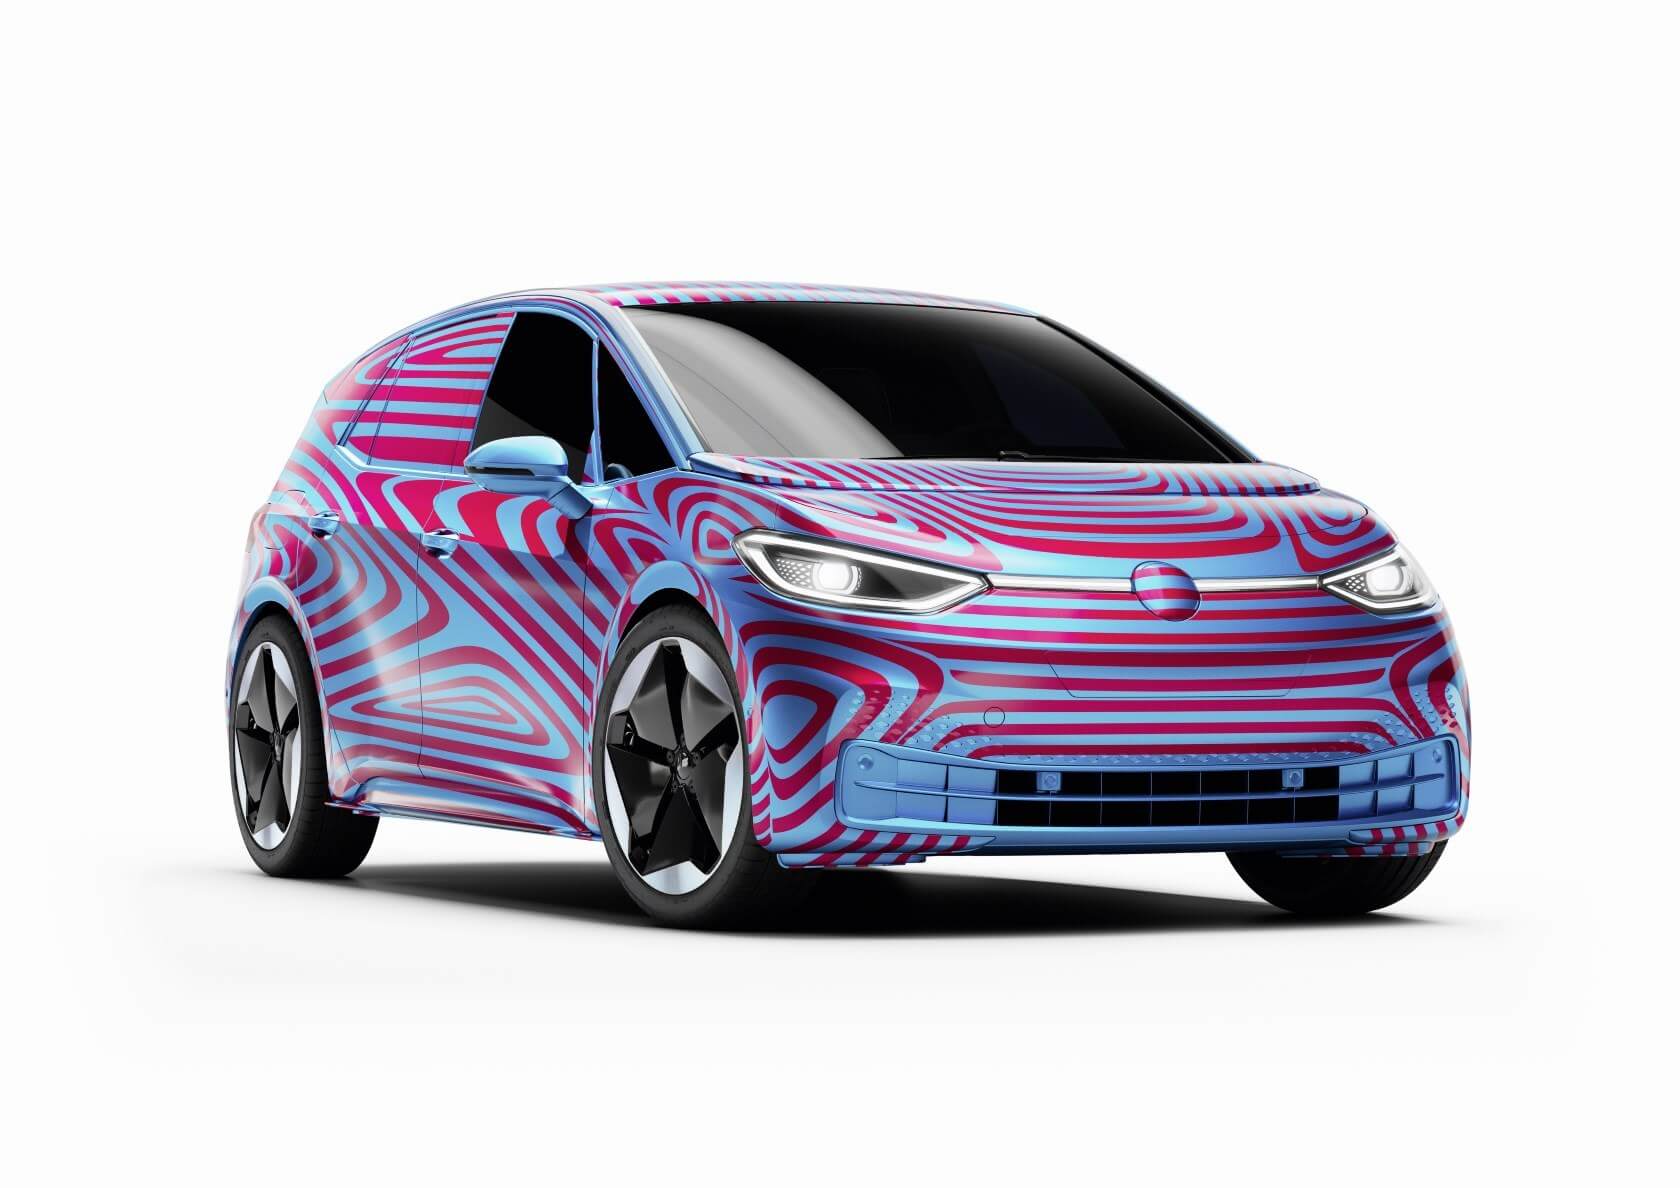 Volkswagen opens up pre-orders for the first vehicle in its new all-electric 'ID.' family of cars